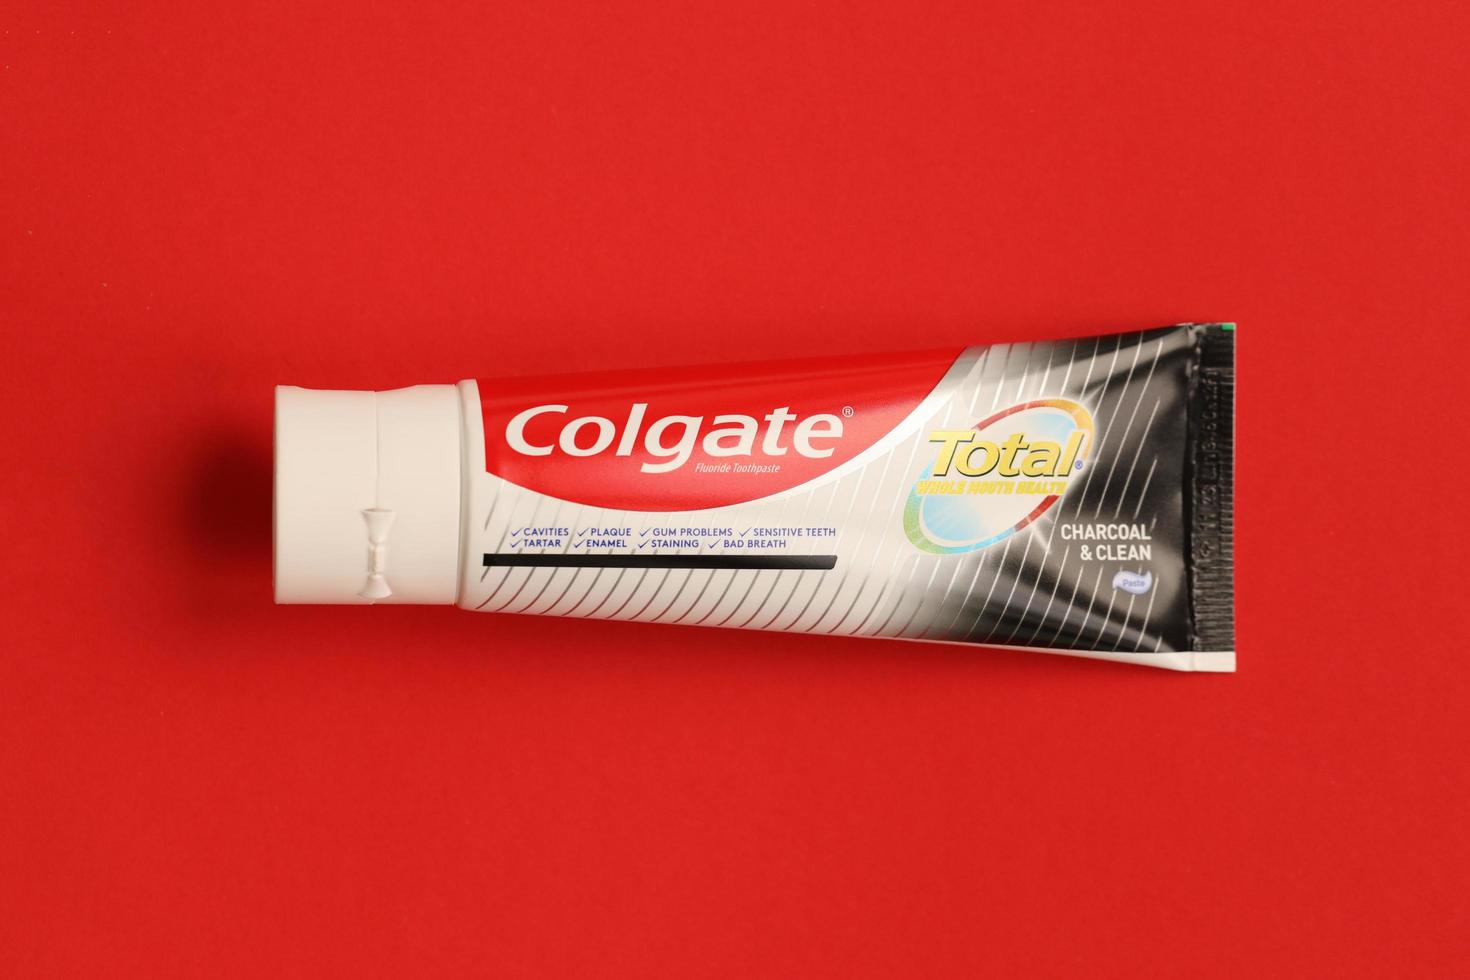 TERNOPIL, UKRAINE - JUNE 23, 2022 Colgate toothpaste, a brand of oral hygiene products manufactured by American consumer-goods company Colgate-Palmolive photo